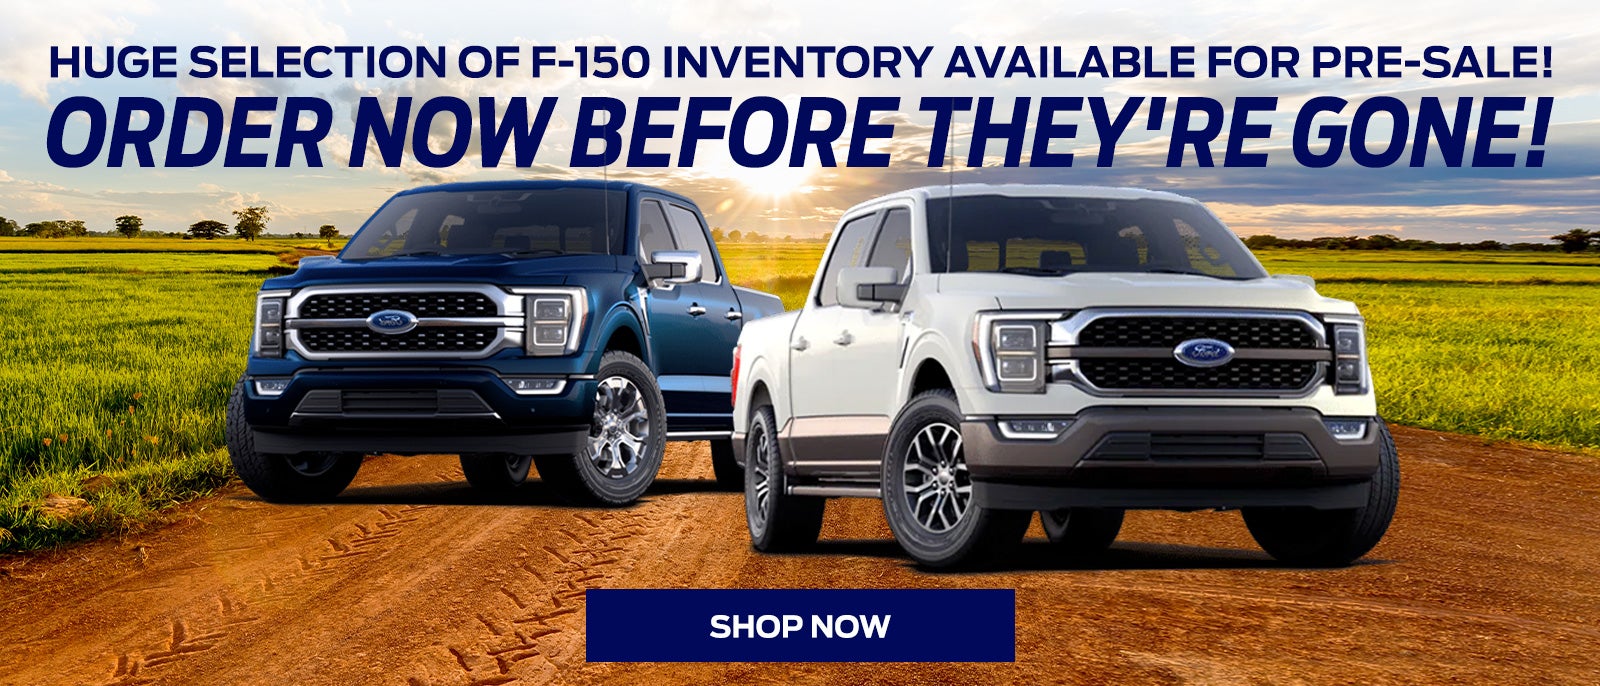 F-150s Available